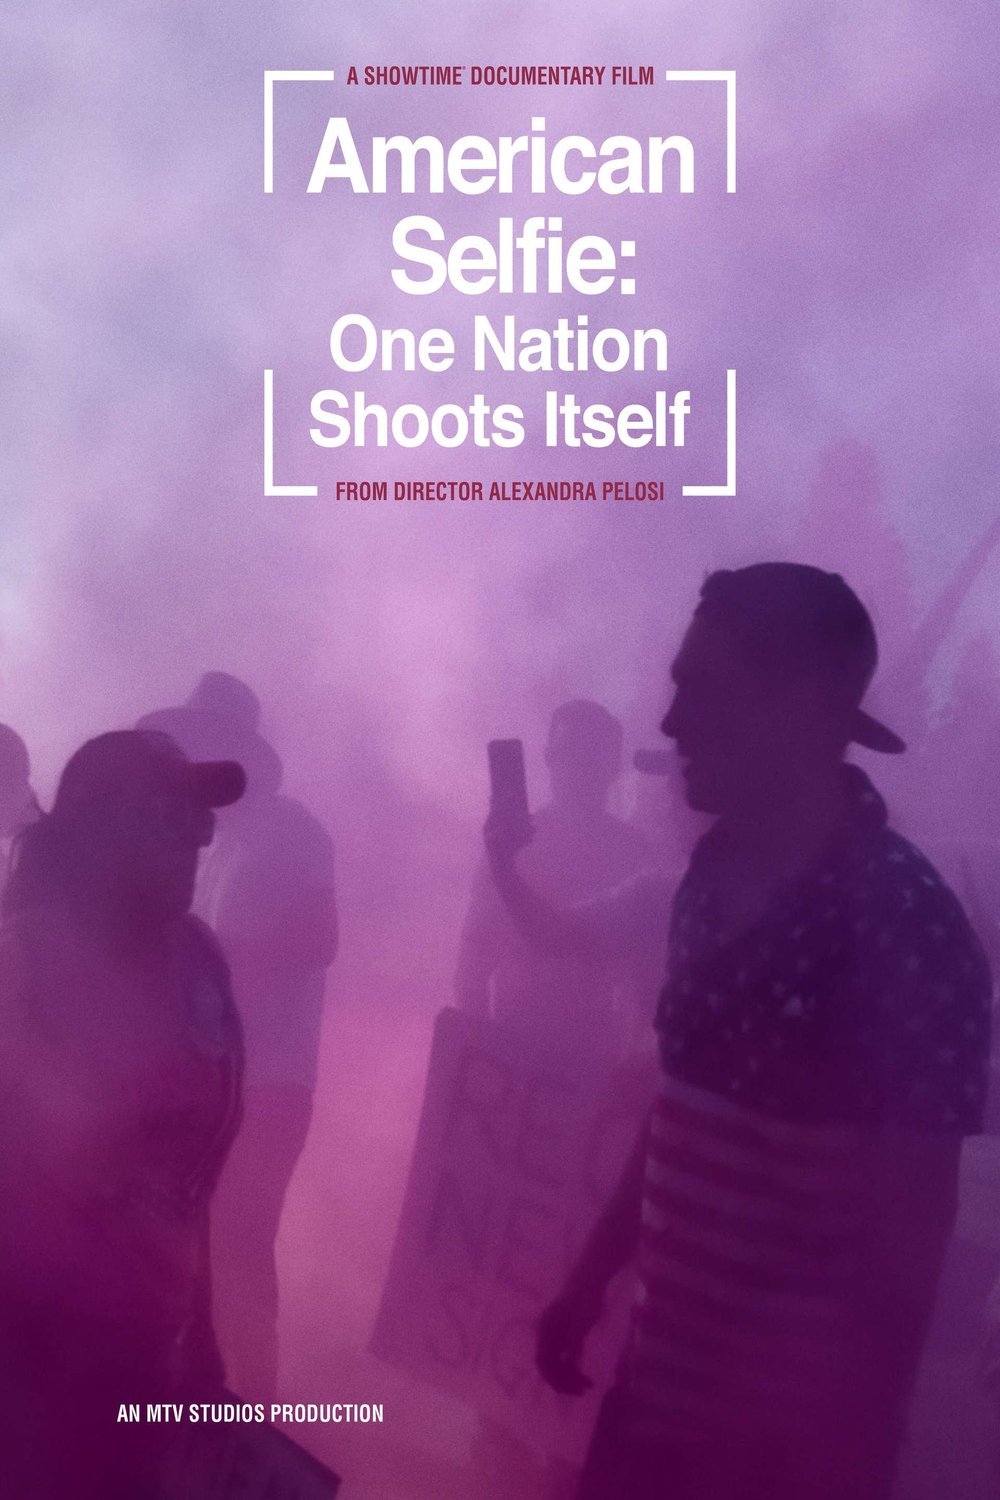 Poster of the movie American Selfie: One Nation Shoots Itself